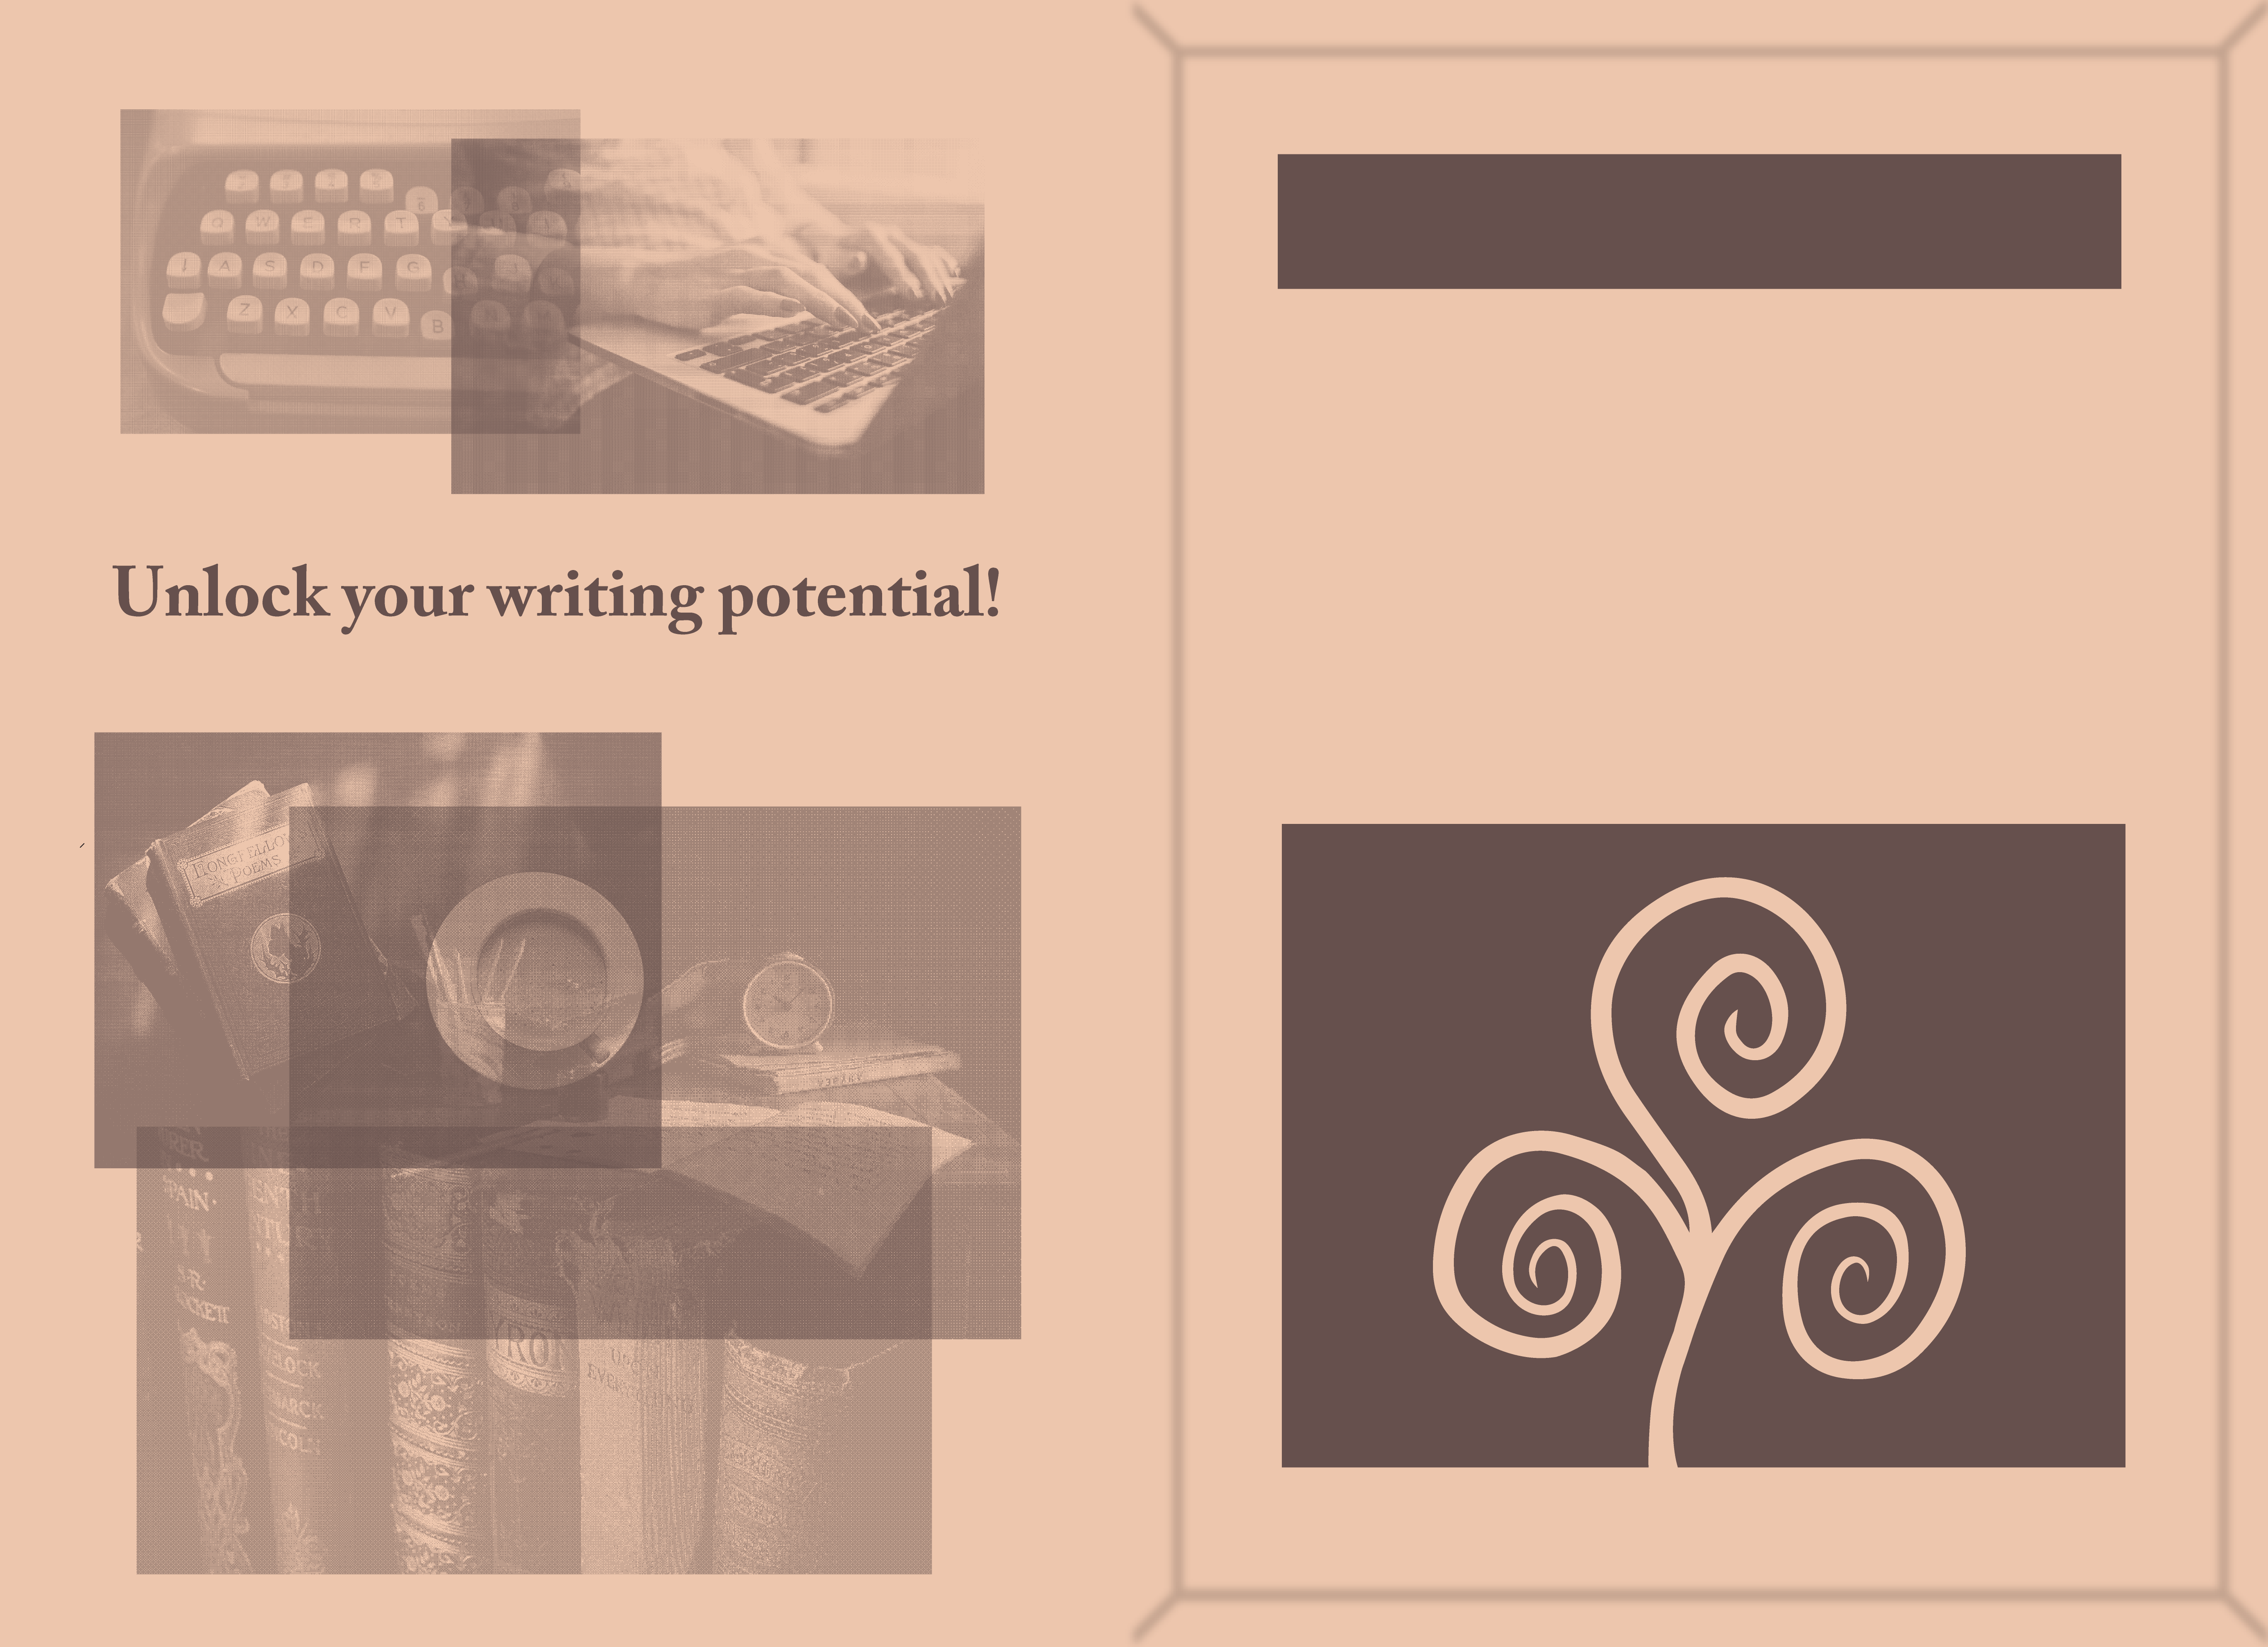 This is the inside of a book-like package. Its main background color is tan. 
			
			On the left
			side are a couple of partially faded, dark brown photo collages with dither effects. One 
			is at the top center part of this section, and it contains a photo of a typewriter, and a 
			photo of someone typing on a laptop keyboard. These two images partially overlap each other. 
			
			Below the 1st photo collage is the phrase, Unlock your writing potential! written in a dark 
			brown color, and a serif font. 
			
			The remain 2/3rds of this section contains another photo collage. 
			This one has three photos overlapping each other. One showcases a top-down view of a table.
			On this wooden table is two old books, and a cup with a plate below it that contains liquid.
			Another presents a table with books, an open notebook, and a block on it. The last photo are
			several books shelved next to each other.
			
			The right side of the book package's interior shows faded lines intended to show some of The
			package's borders. Also, there are two, dark brown rectangles on this side. One is much shorter
			than the other. The shorter one is at the top center part of this section. The taller one is at 
			the bottom half part of this section, and has a tan-colored pattern which has three spiraling 
			lines intertwined together.